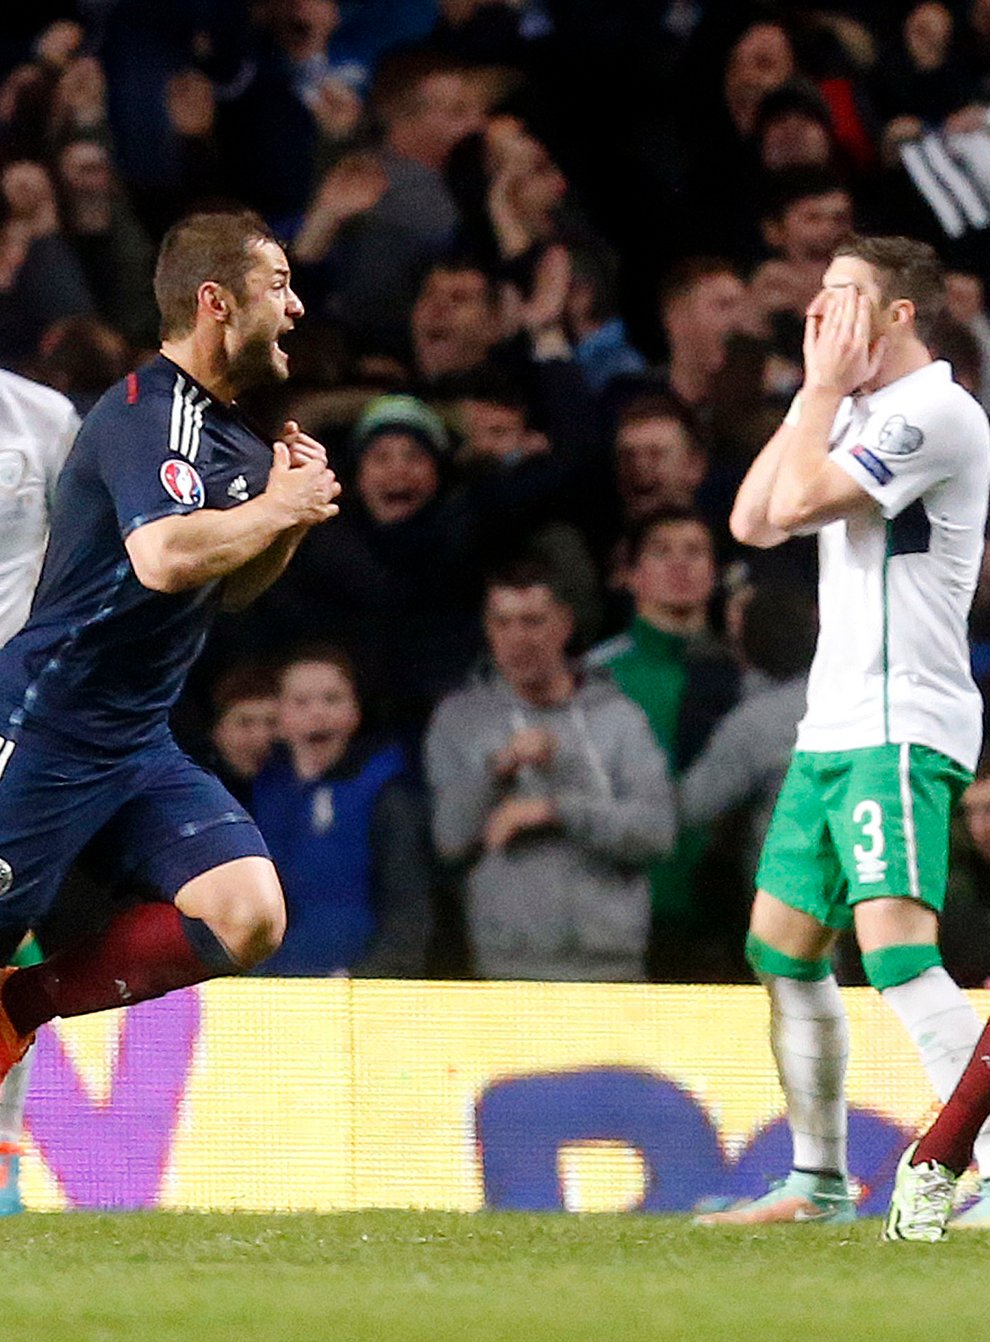 Shaun Maloney (left) fired Scotland to victory over the Republic of Ireland during the Euro 2016 qualifying campaign (Danny Lawson/PA)